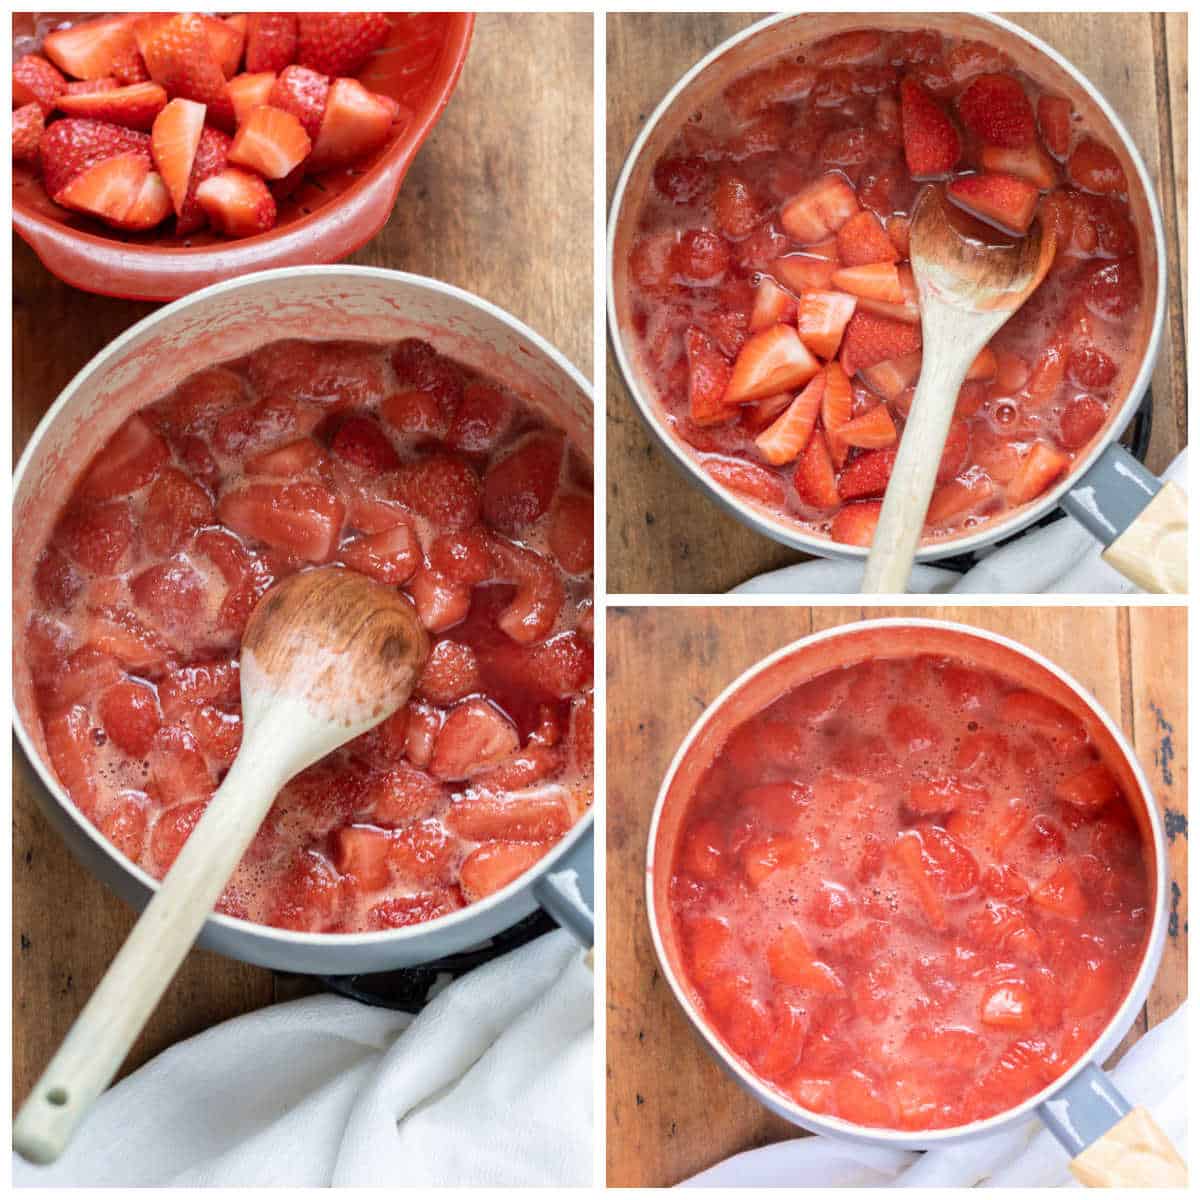 Collage of stages of strawberry compote cooking.